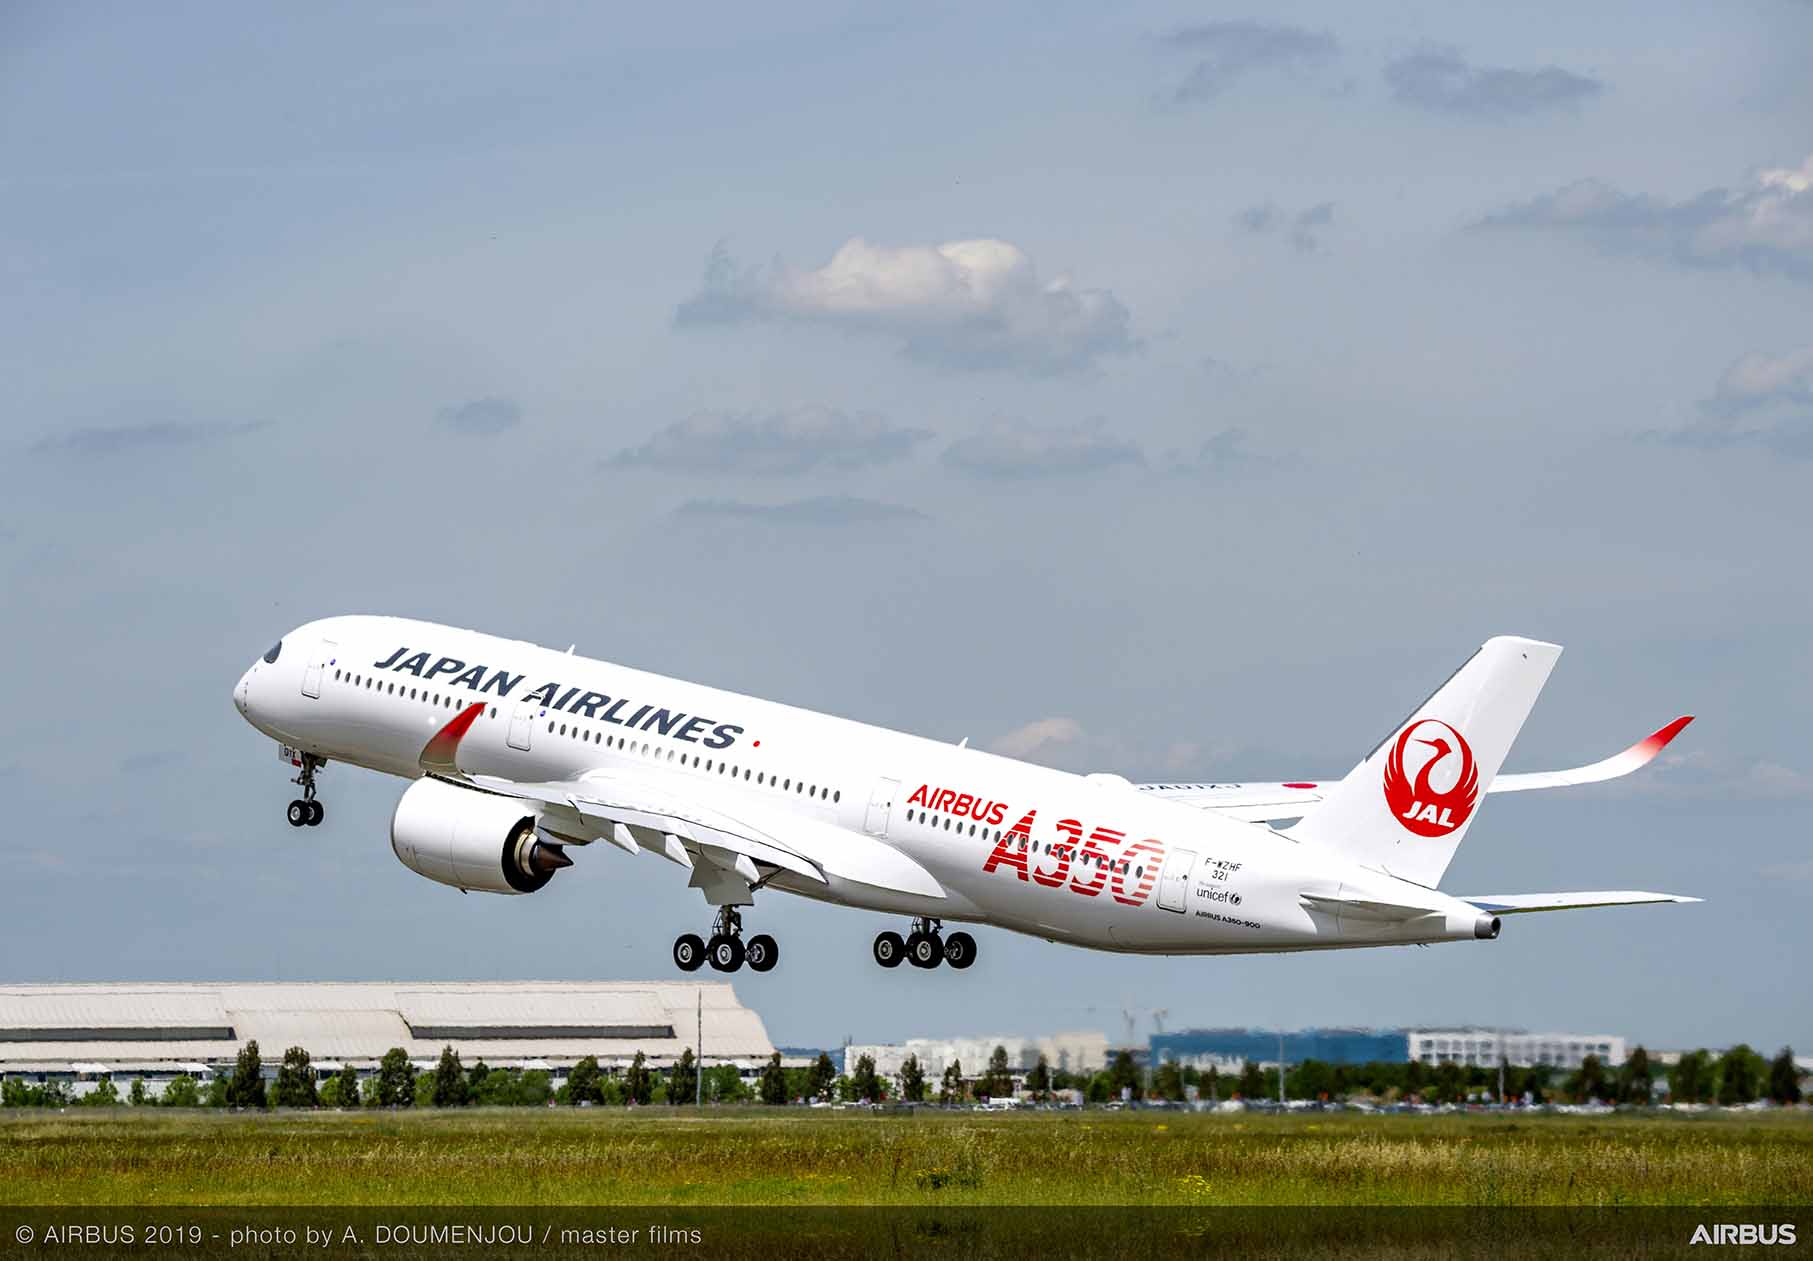 Japan Airlines begins A321 freighter conversions in Singapore